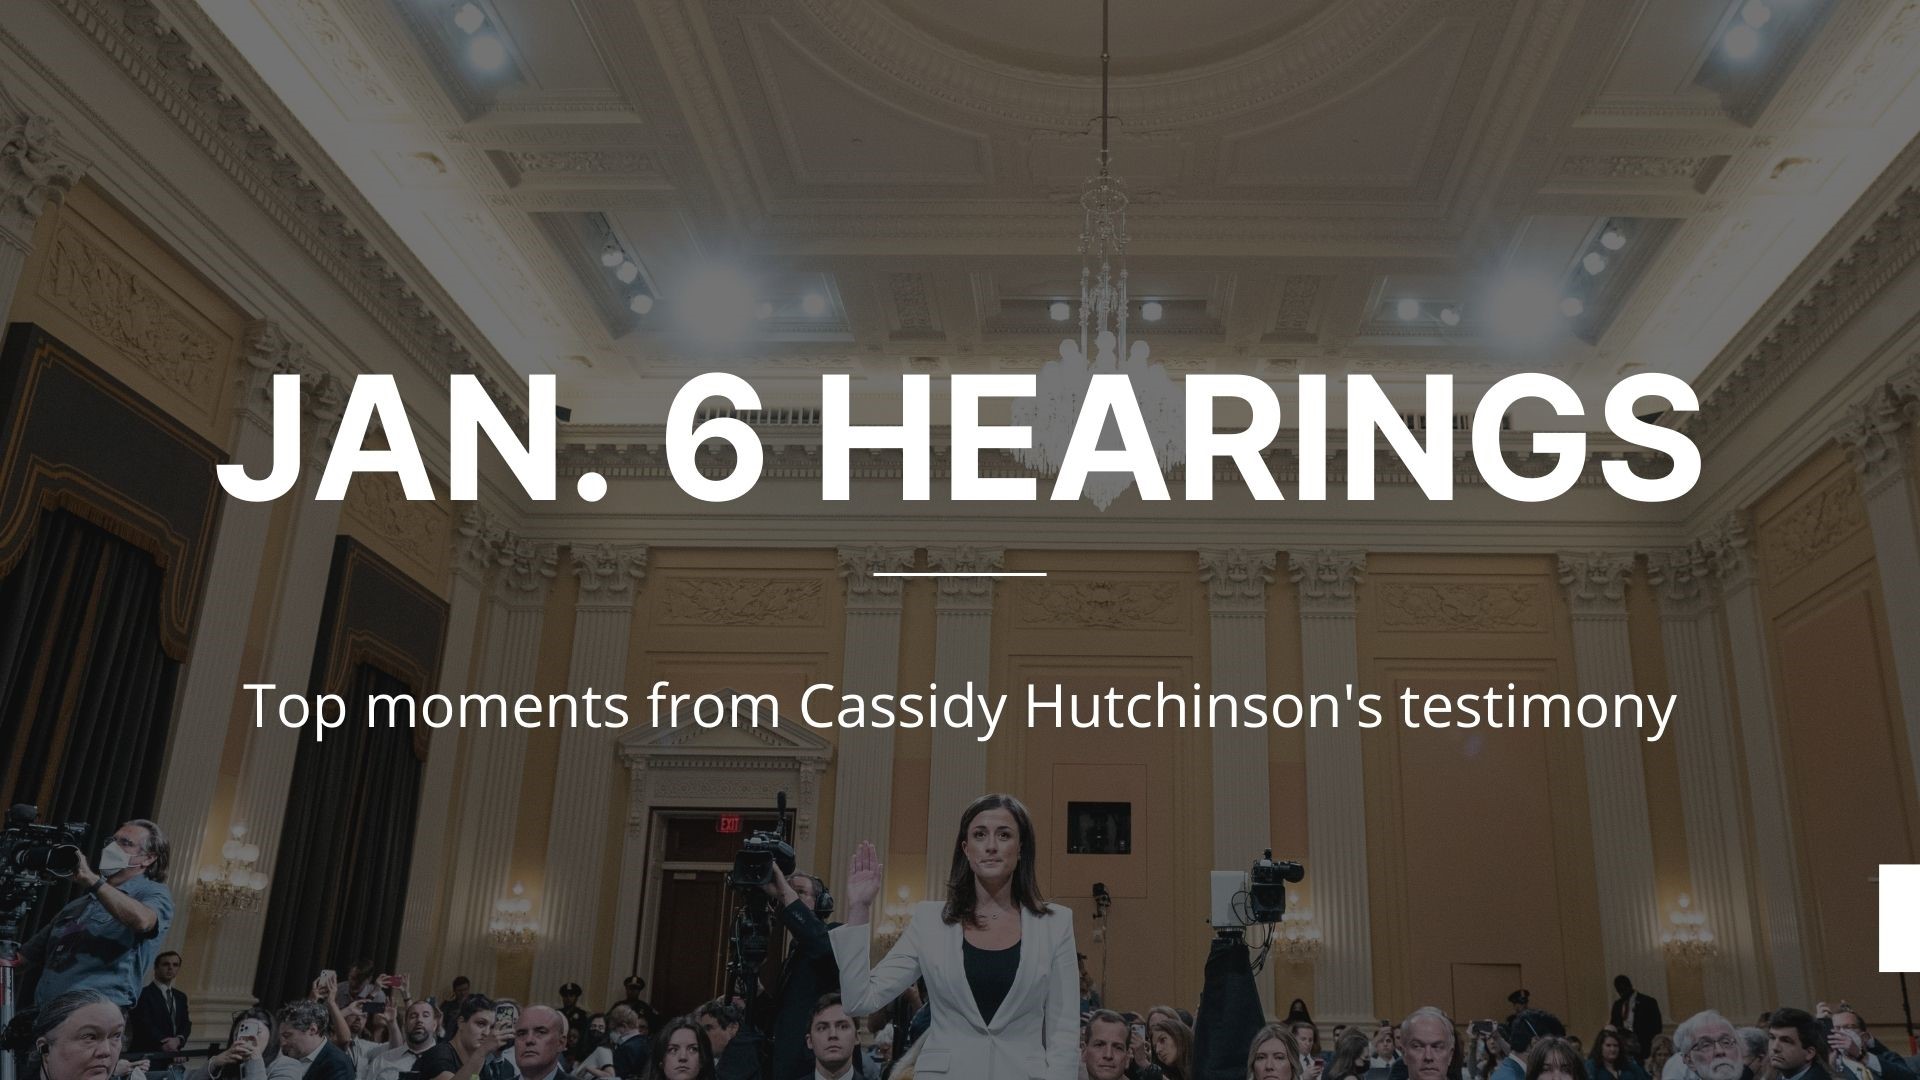 A collection of some of the top moments from former White House aide Cassidy Hutchinson's testimony for the Jan. 6 committee. An AP reporter also provides context.